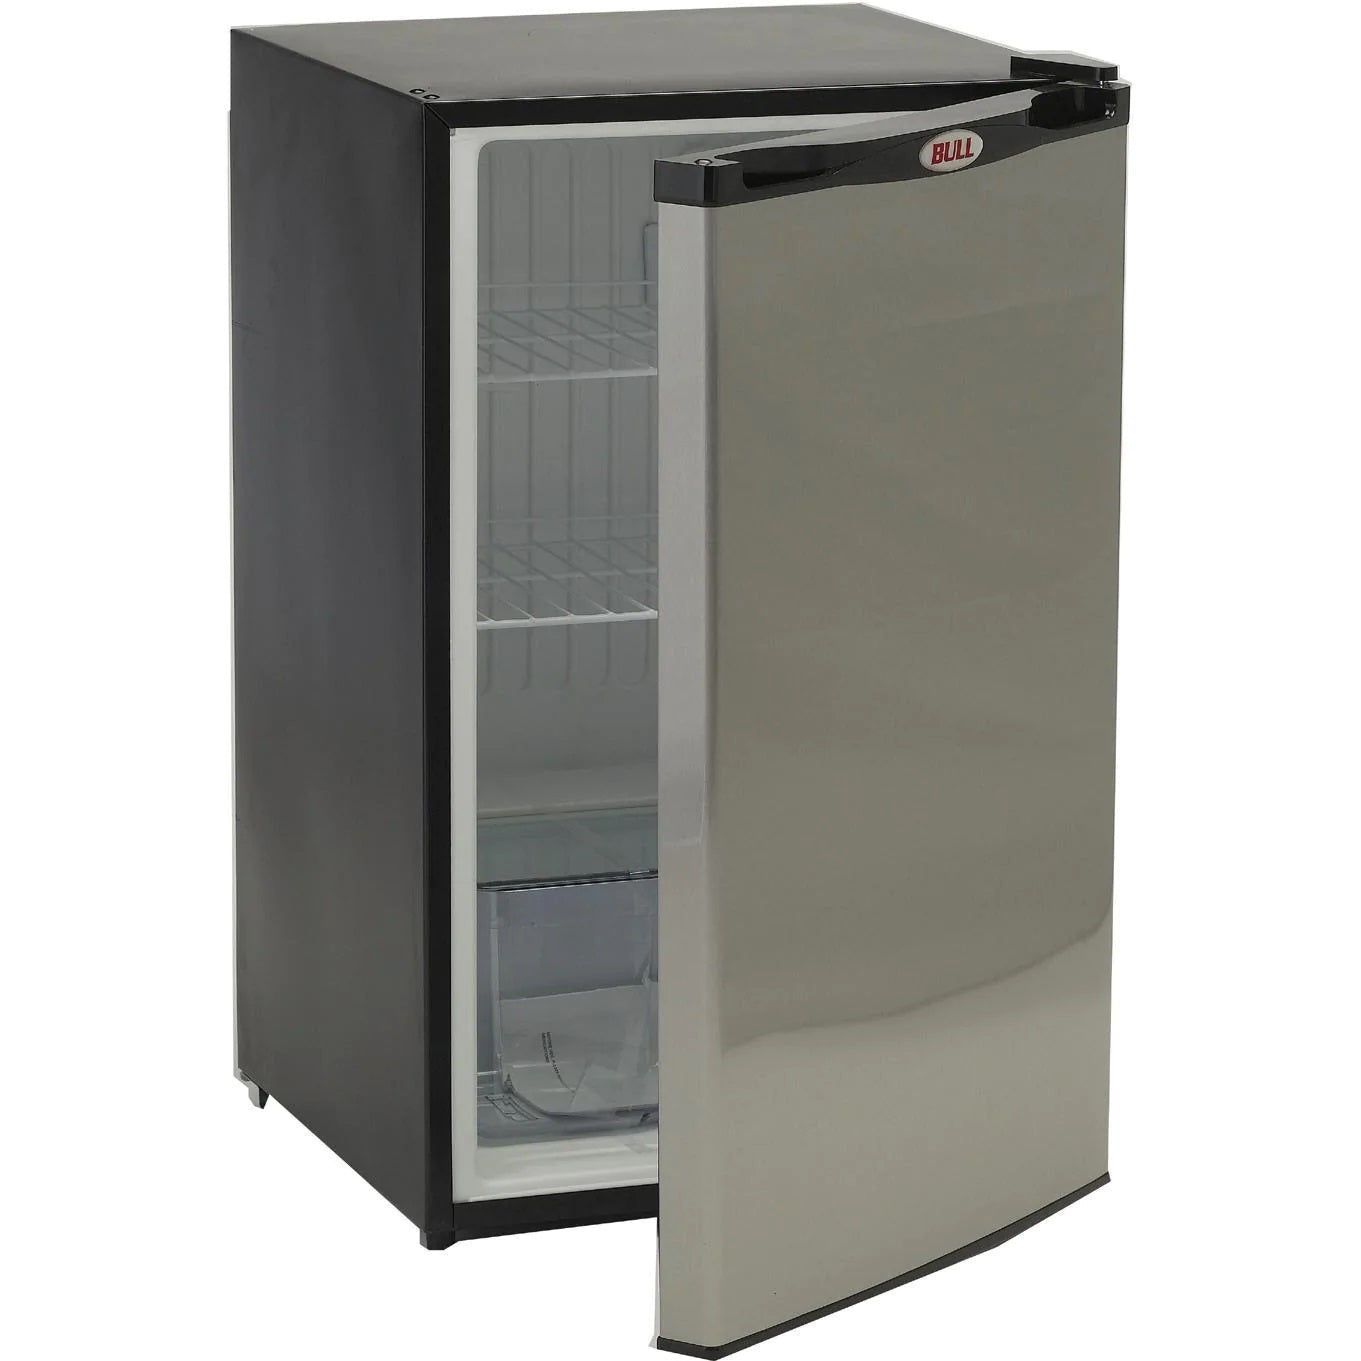 Bull 20-Inch 4.5 Cu. Ft. Compact Refrigerator With Recessed 